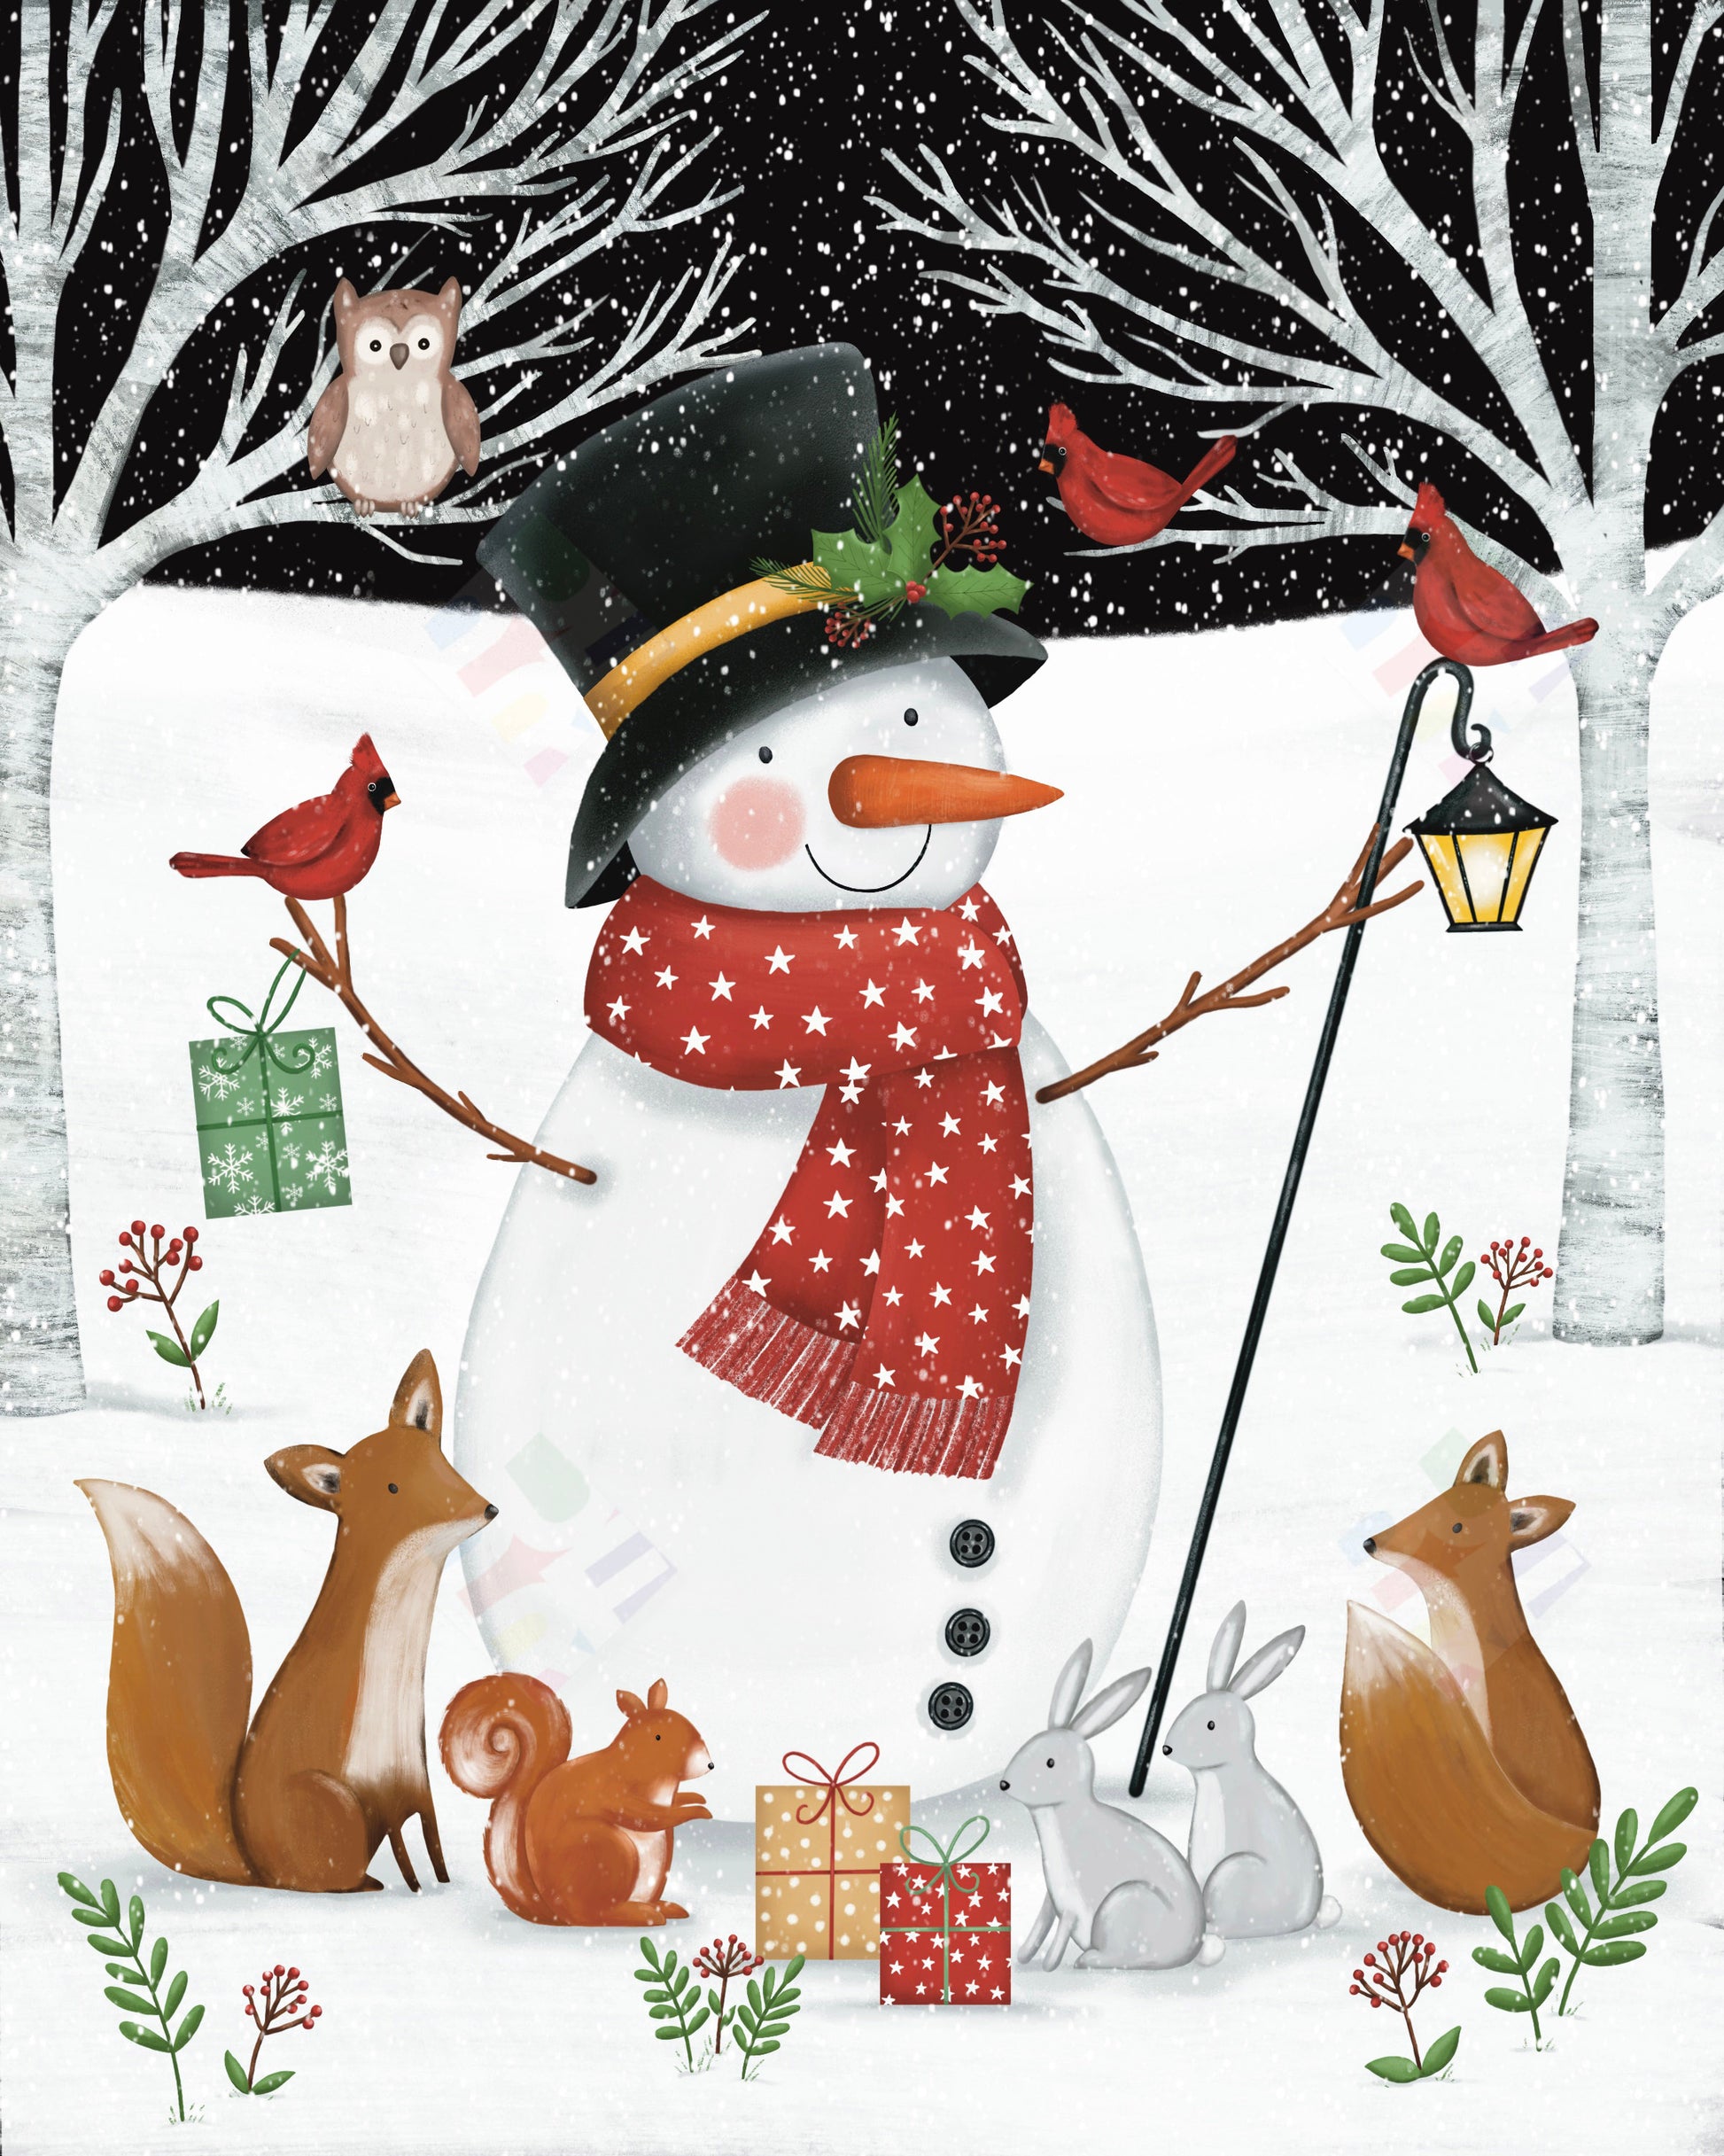 New England Christmas Snowman Design for Pure Art Licensing Agency international by Anna Aitken